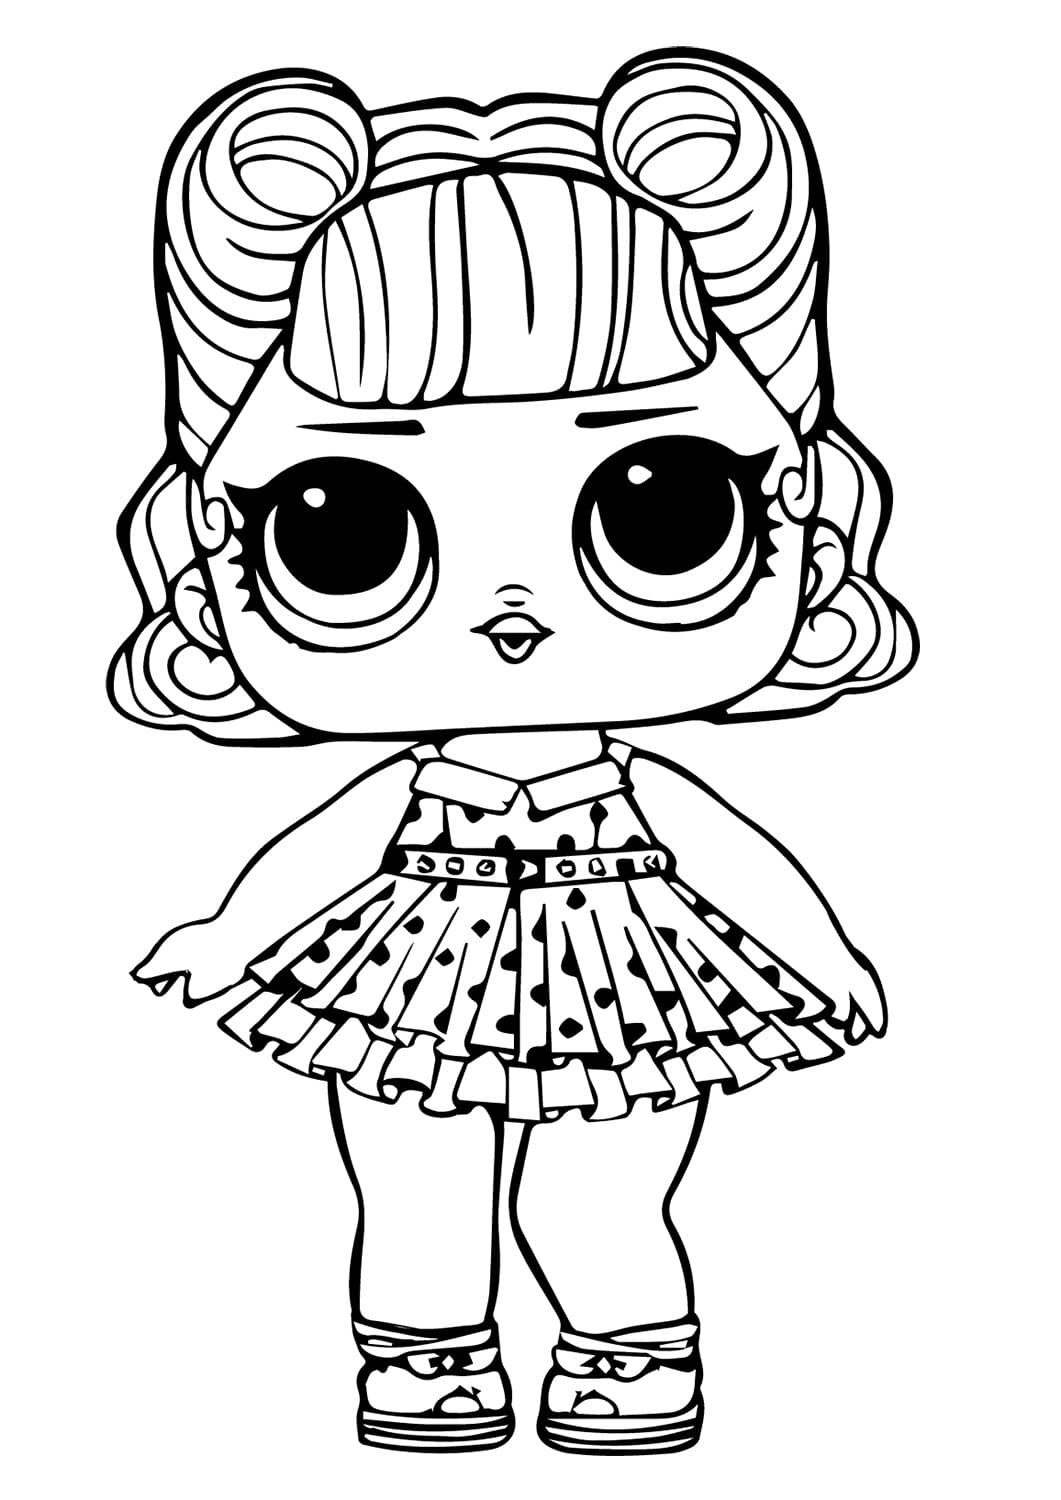 Lol Suprise Doll Jitterbug Coloring Pages   Lol Surprise Doll ...